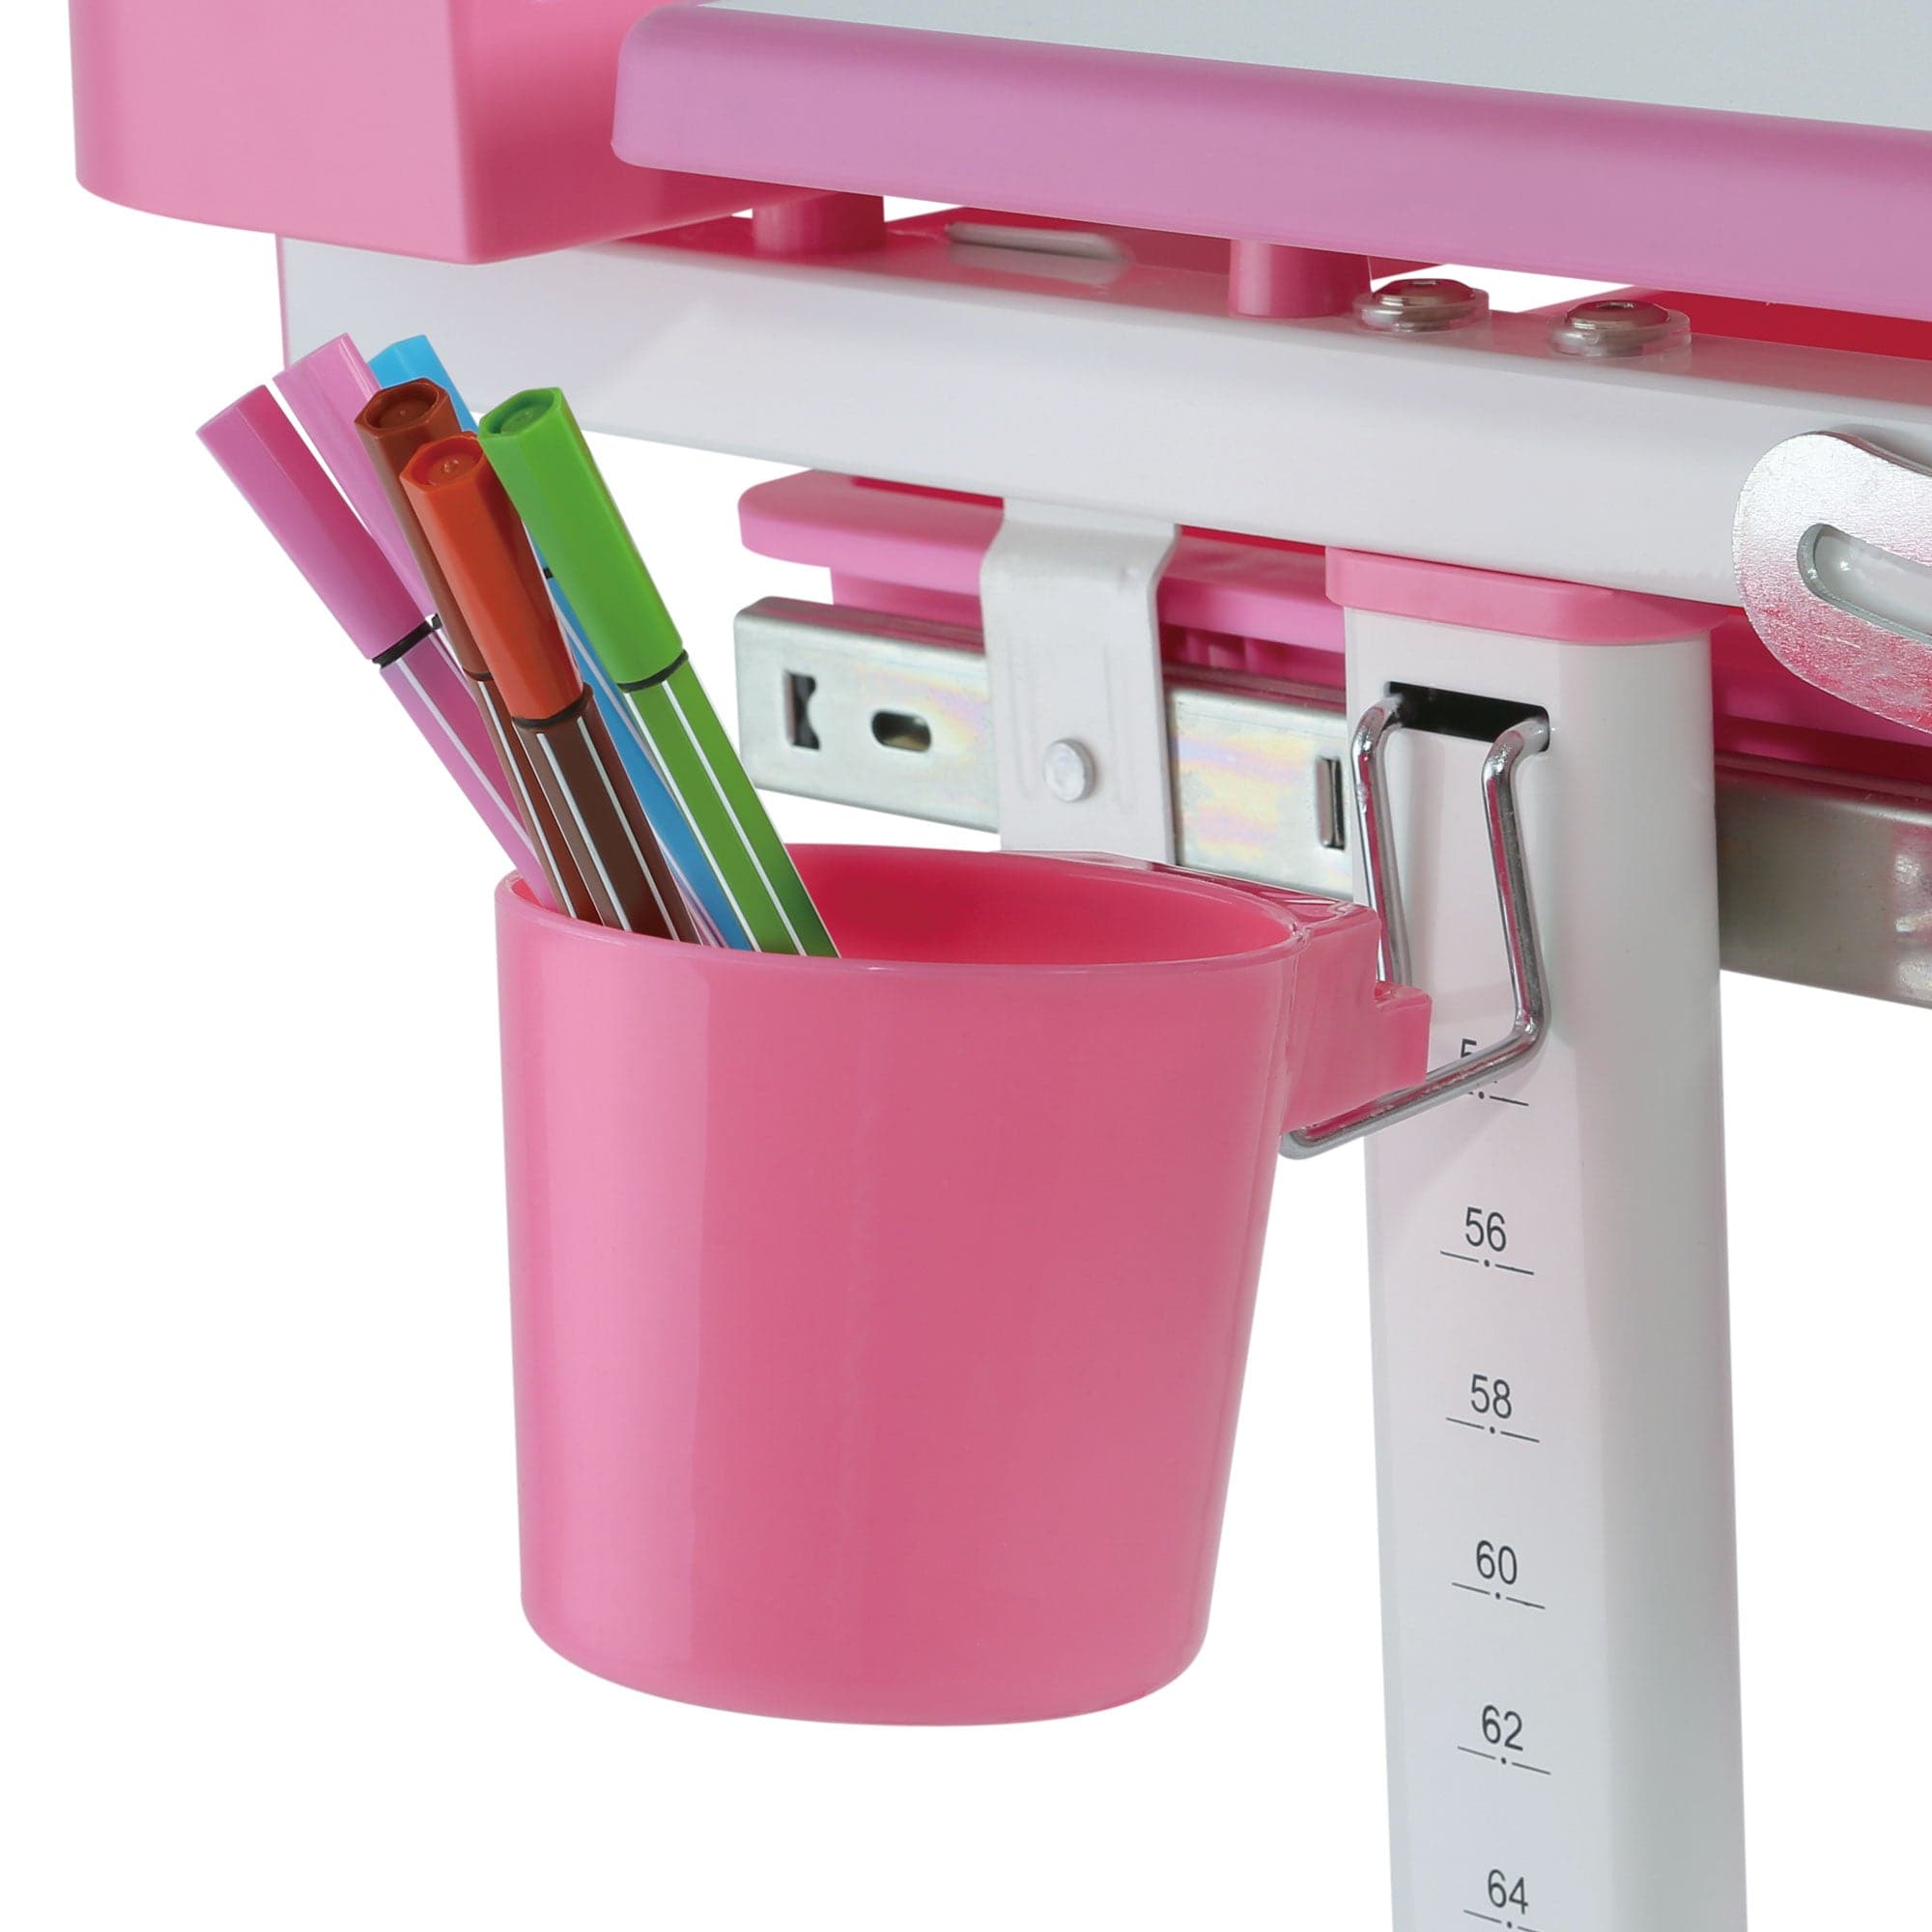 Accessory Kit for Kid's Desk and Chair Set for Ages 3-10 - Mount-It!